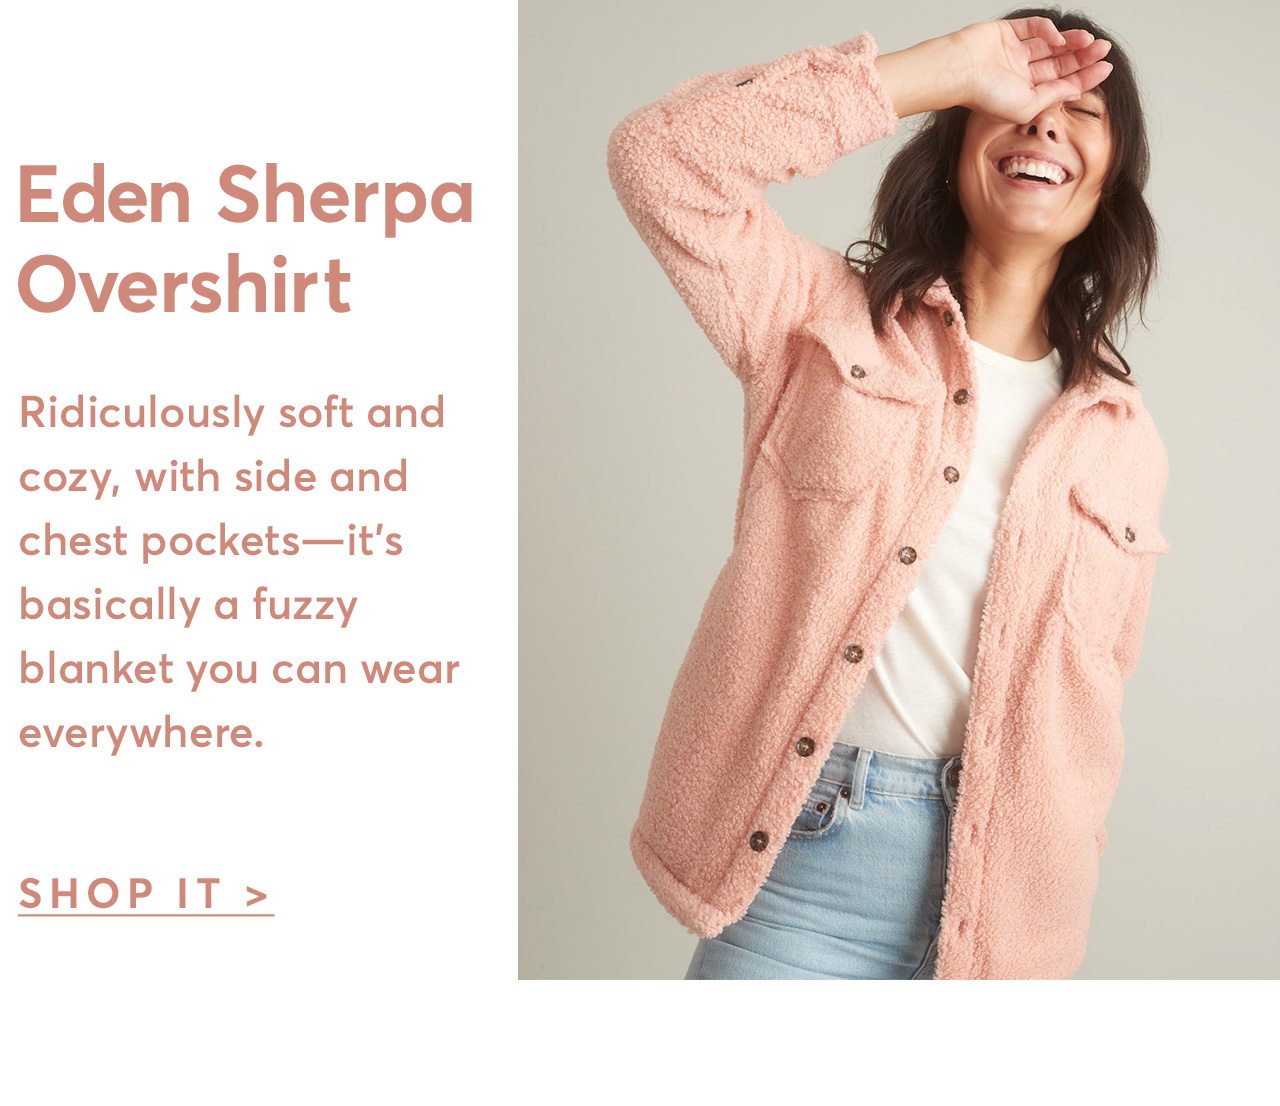 Eden Sherpa Overshirt in Cloud Coral